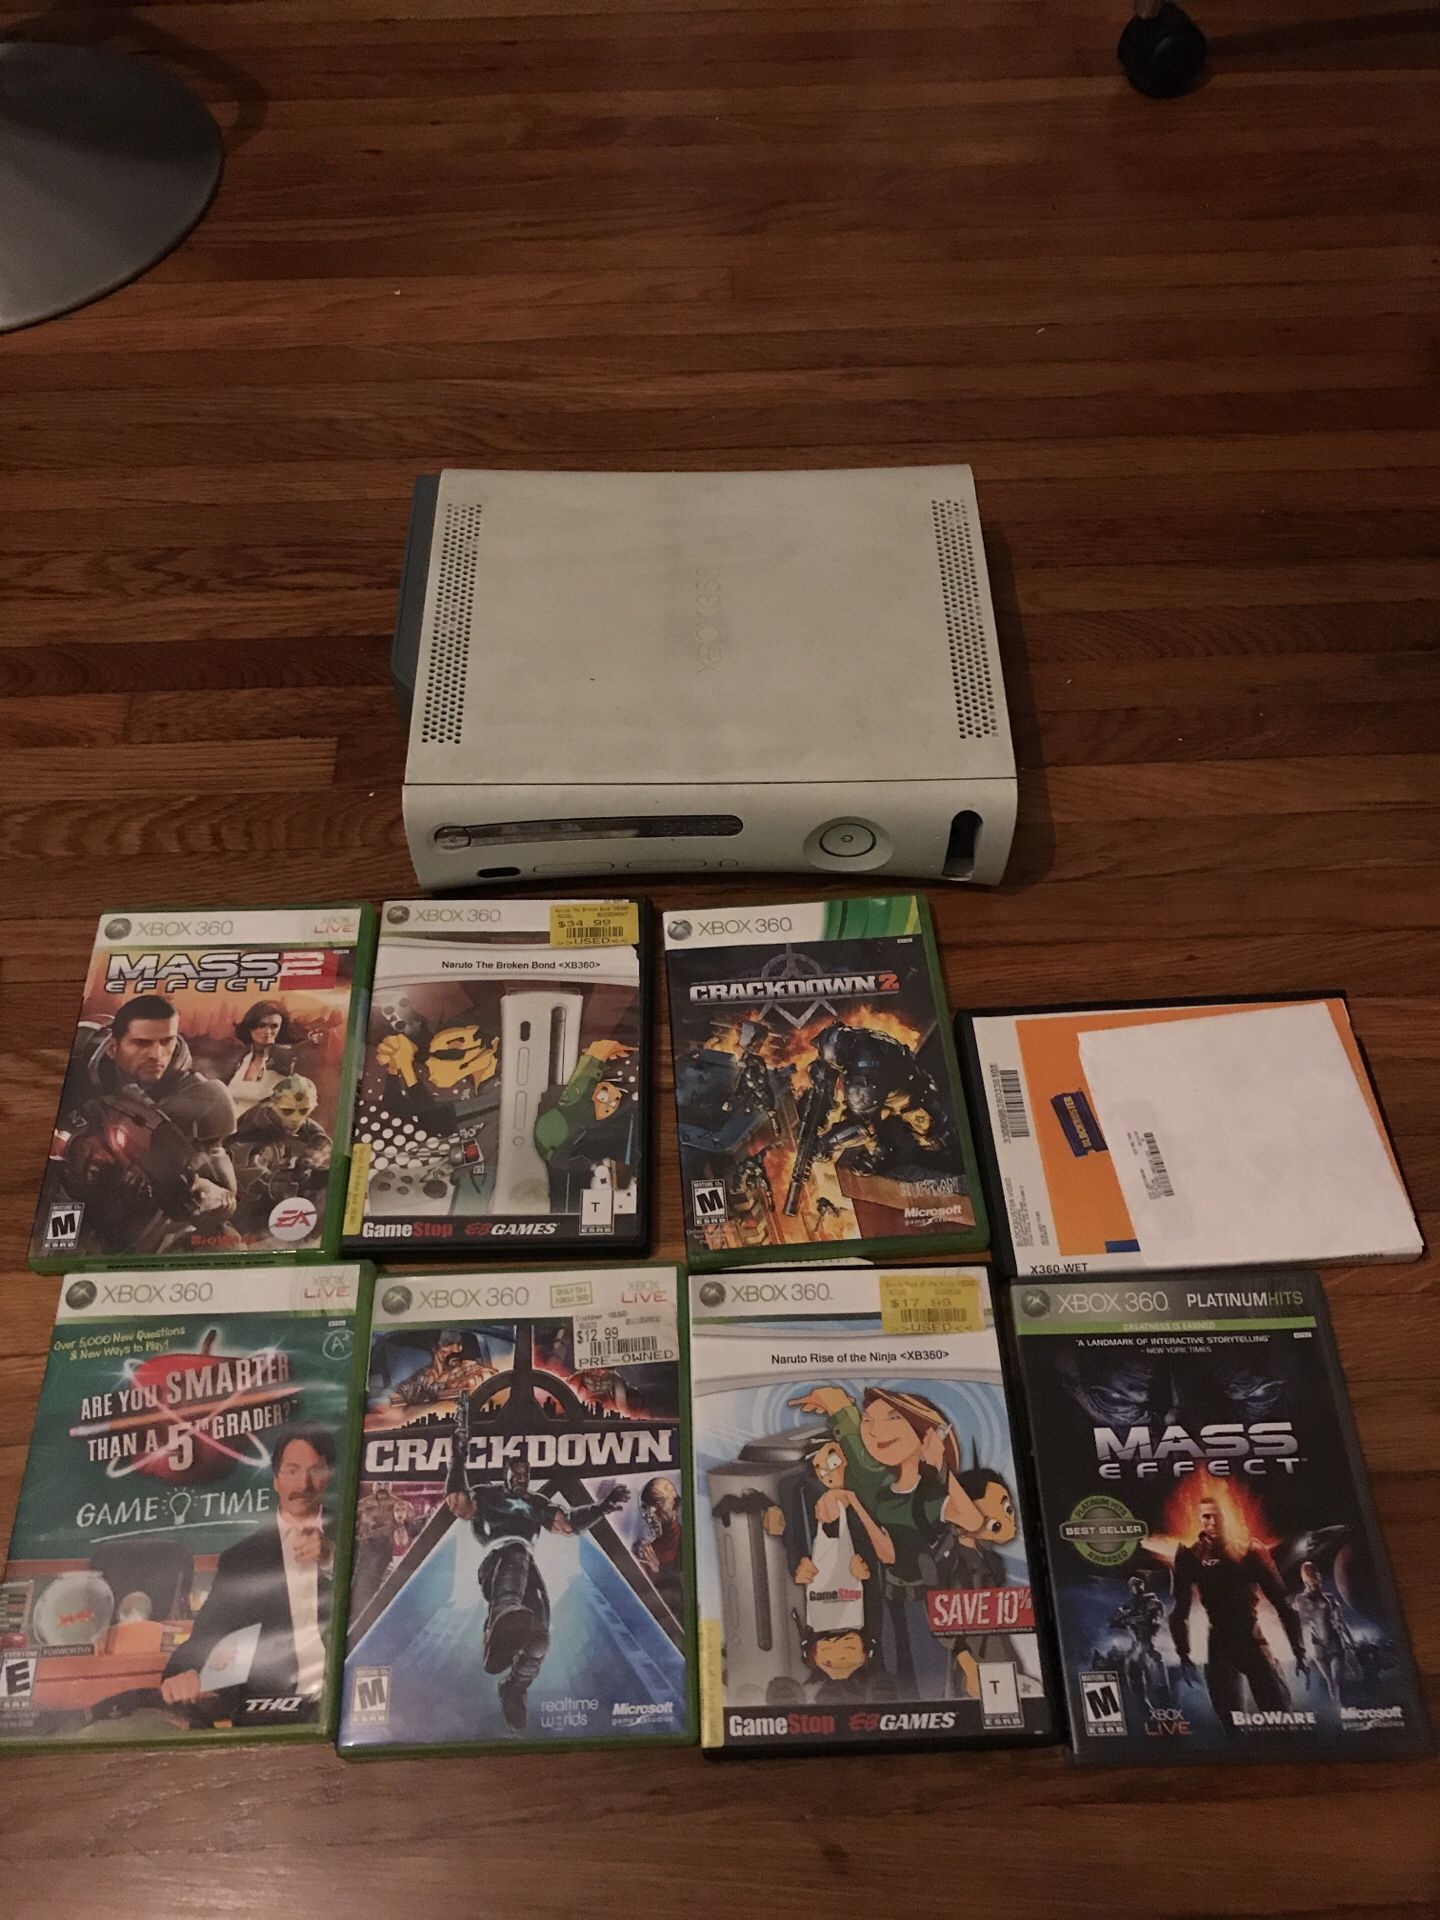 Xbox 360 with 8 games. No cables or controllers